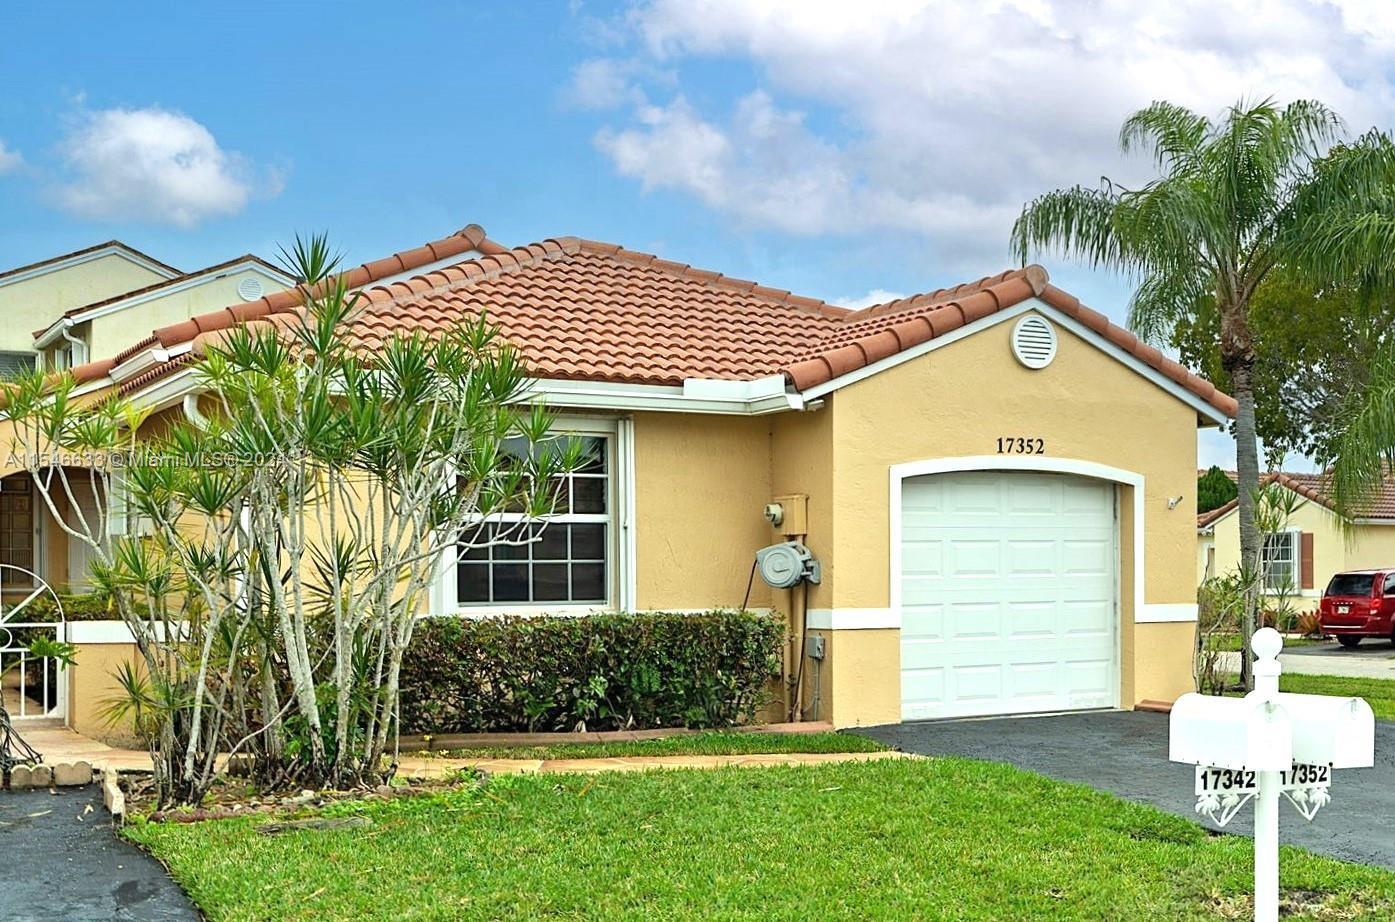 Photo of 17352 NW 6th Ct in Pembroke Pines, FL